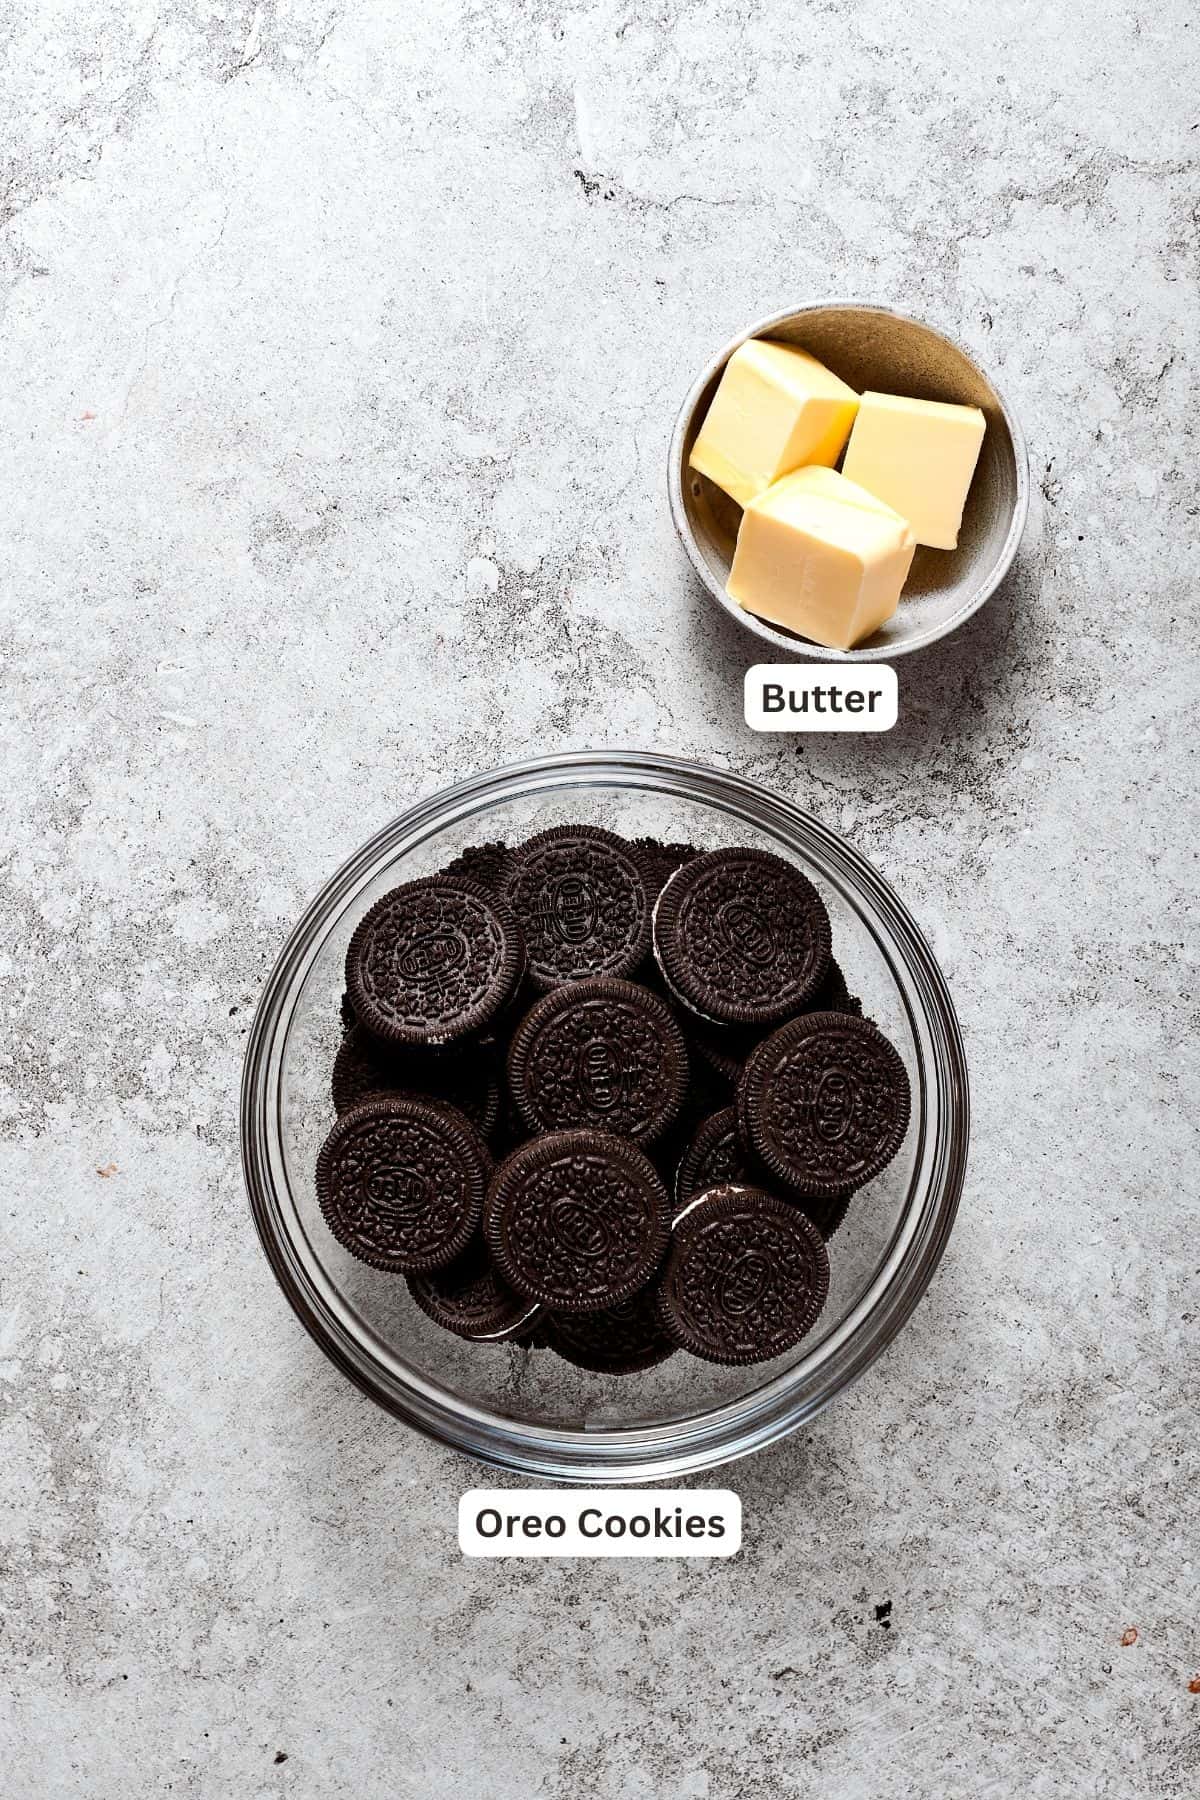 The ingredients for French silk pie crust are shown: butter and Oreo cookies.